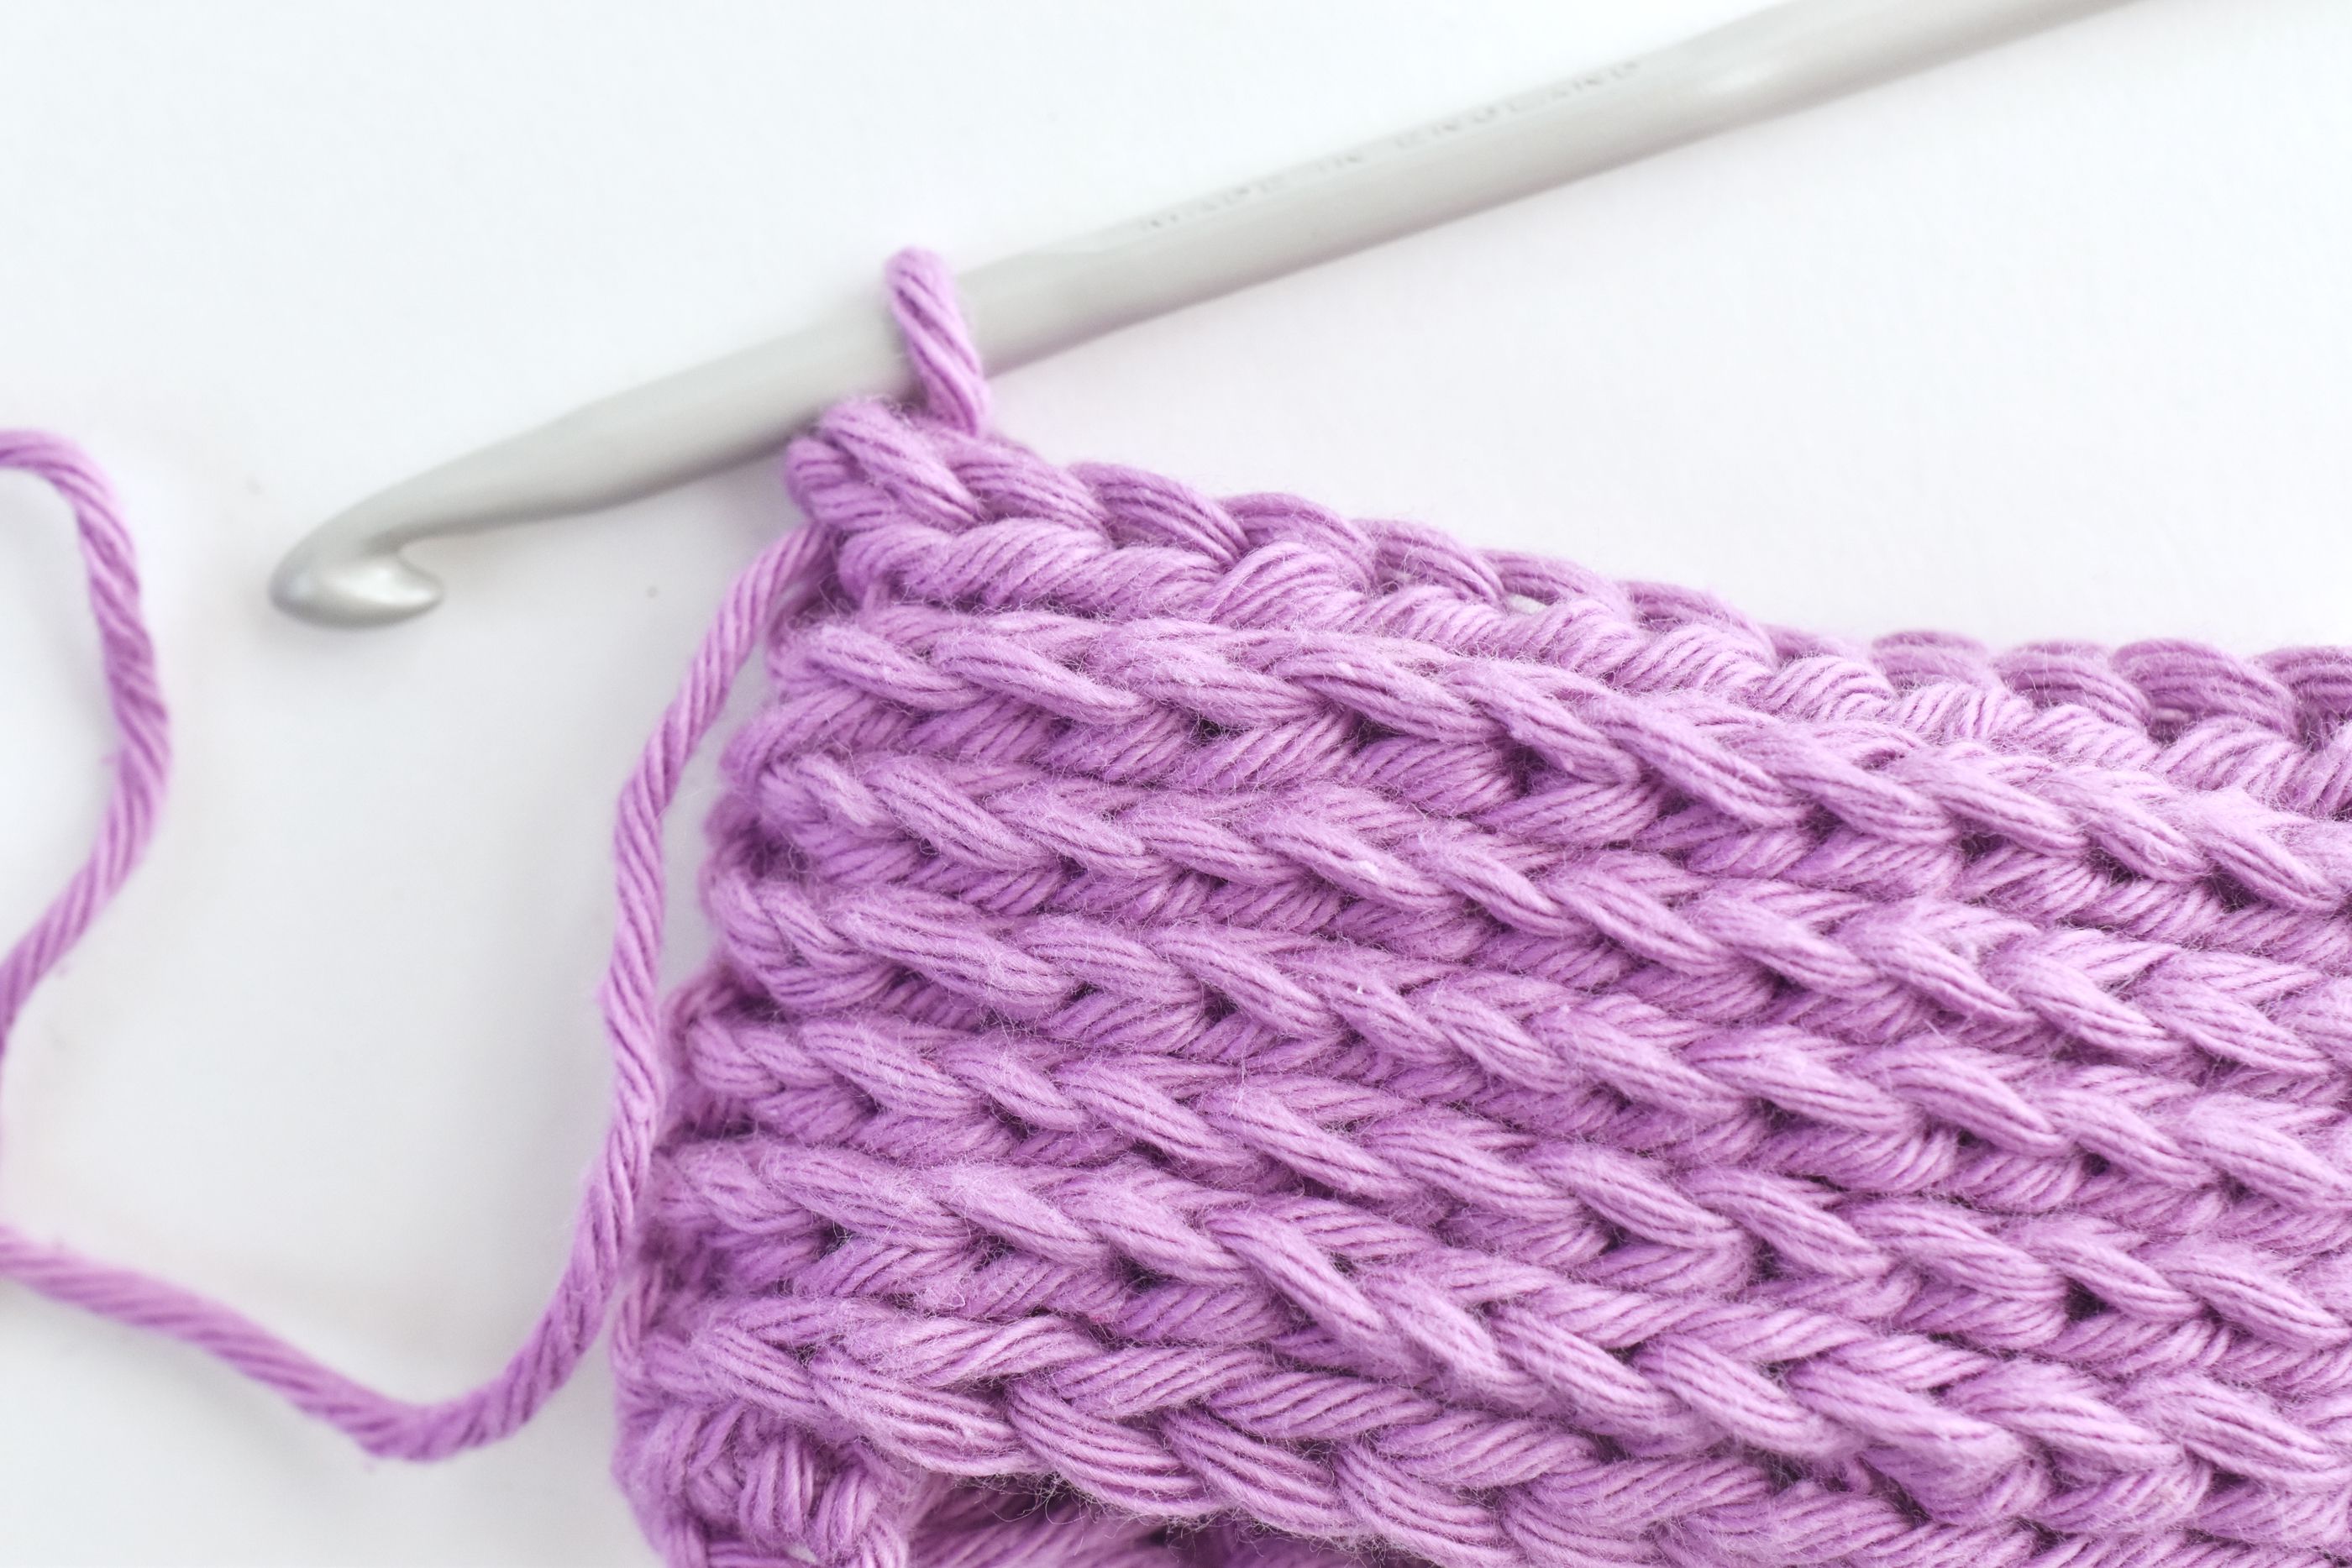 How To Crochet The Camel Stitch